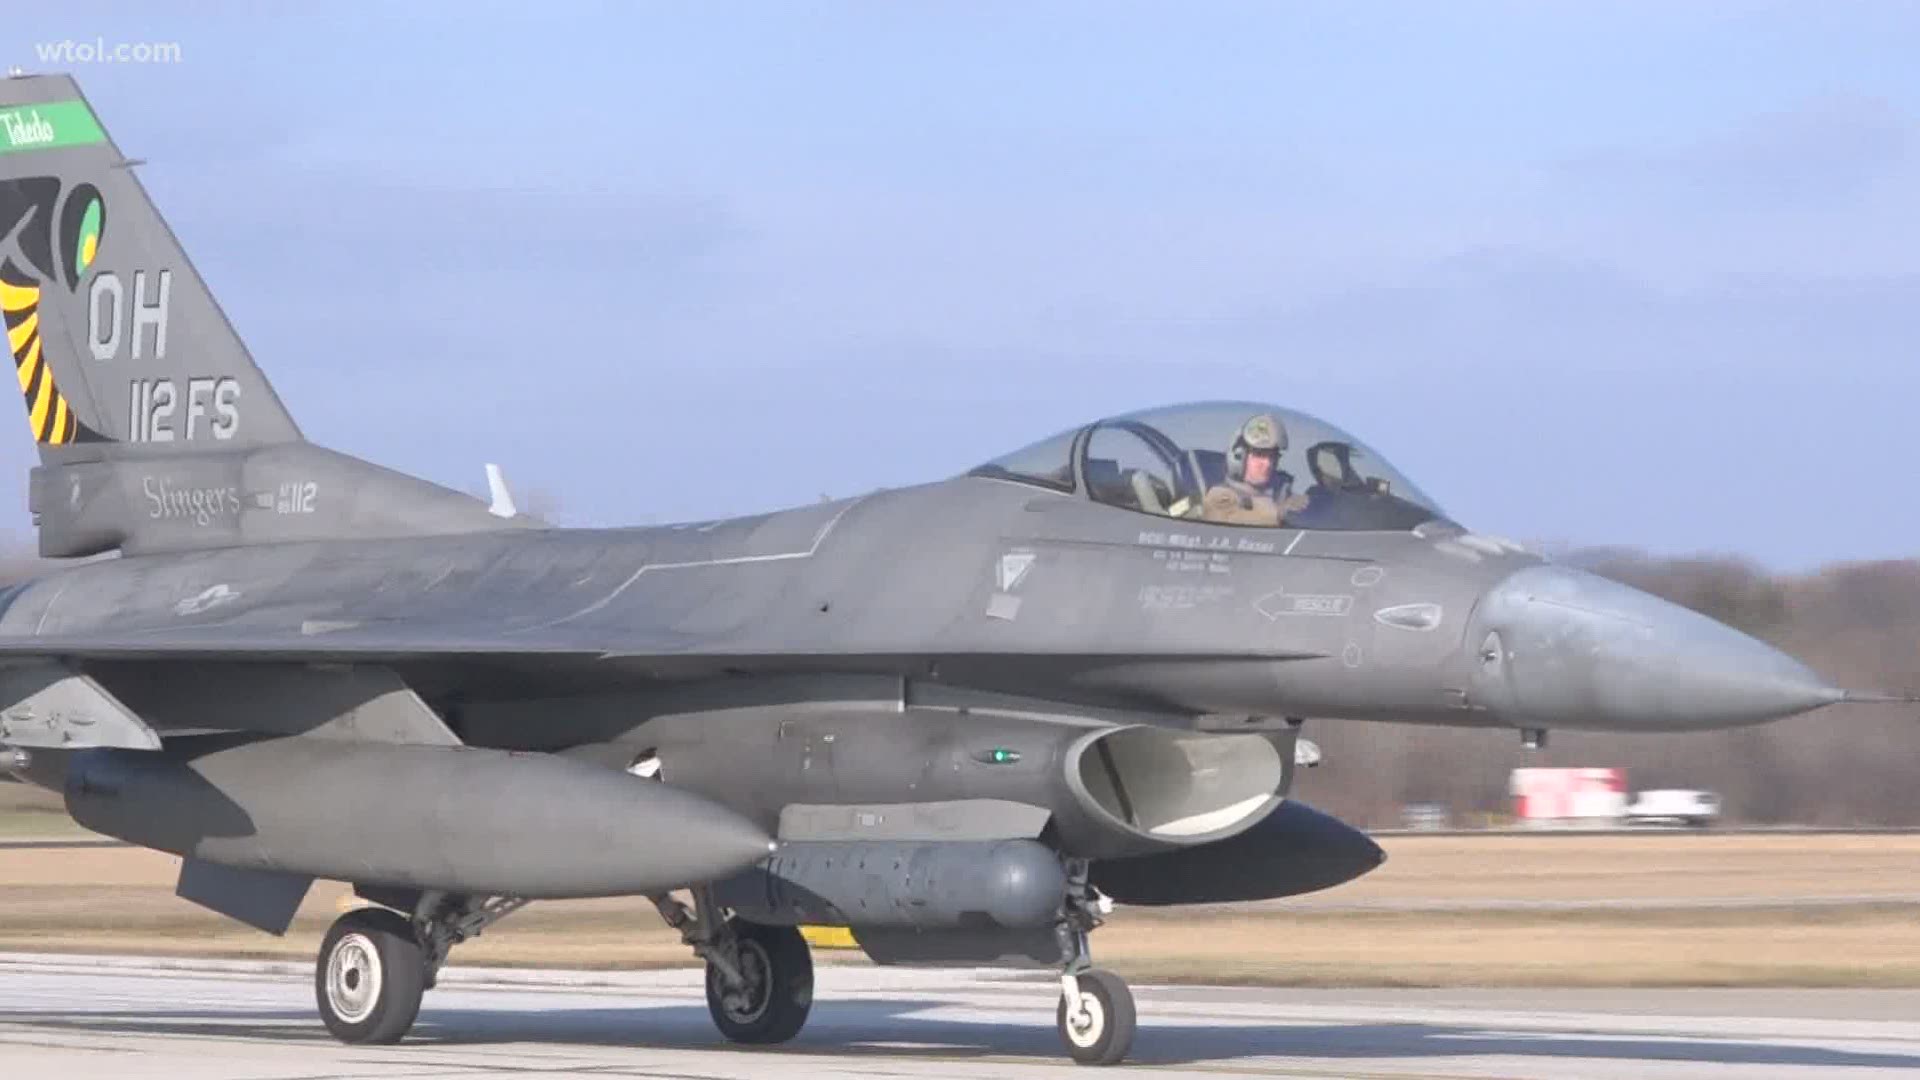 Col. Michael DiDio, commander of the 180th Fighter Wing, exclusively tells WTOL 11 he hopes to prove the National Guard is fighting the pandemic alongside all of us.